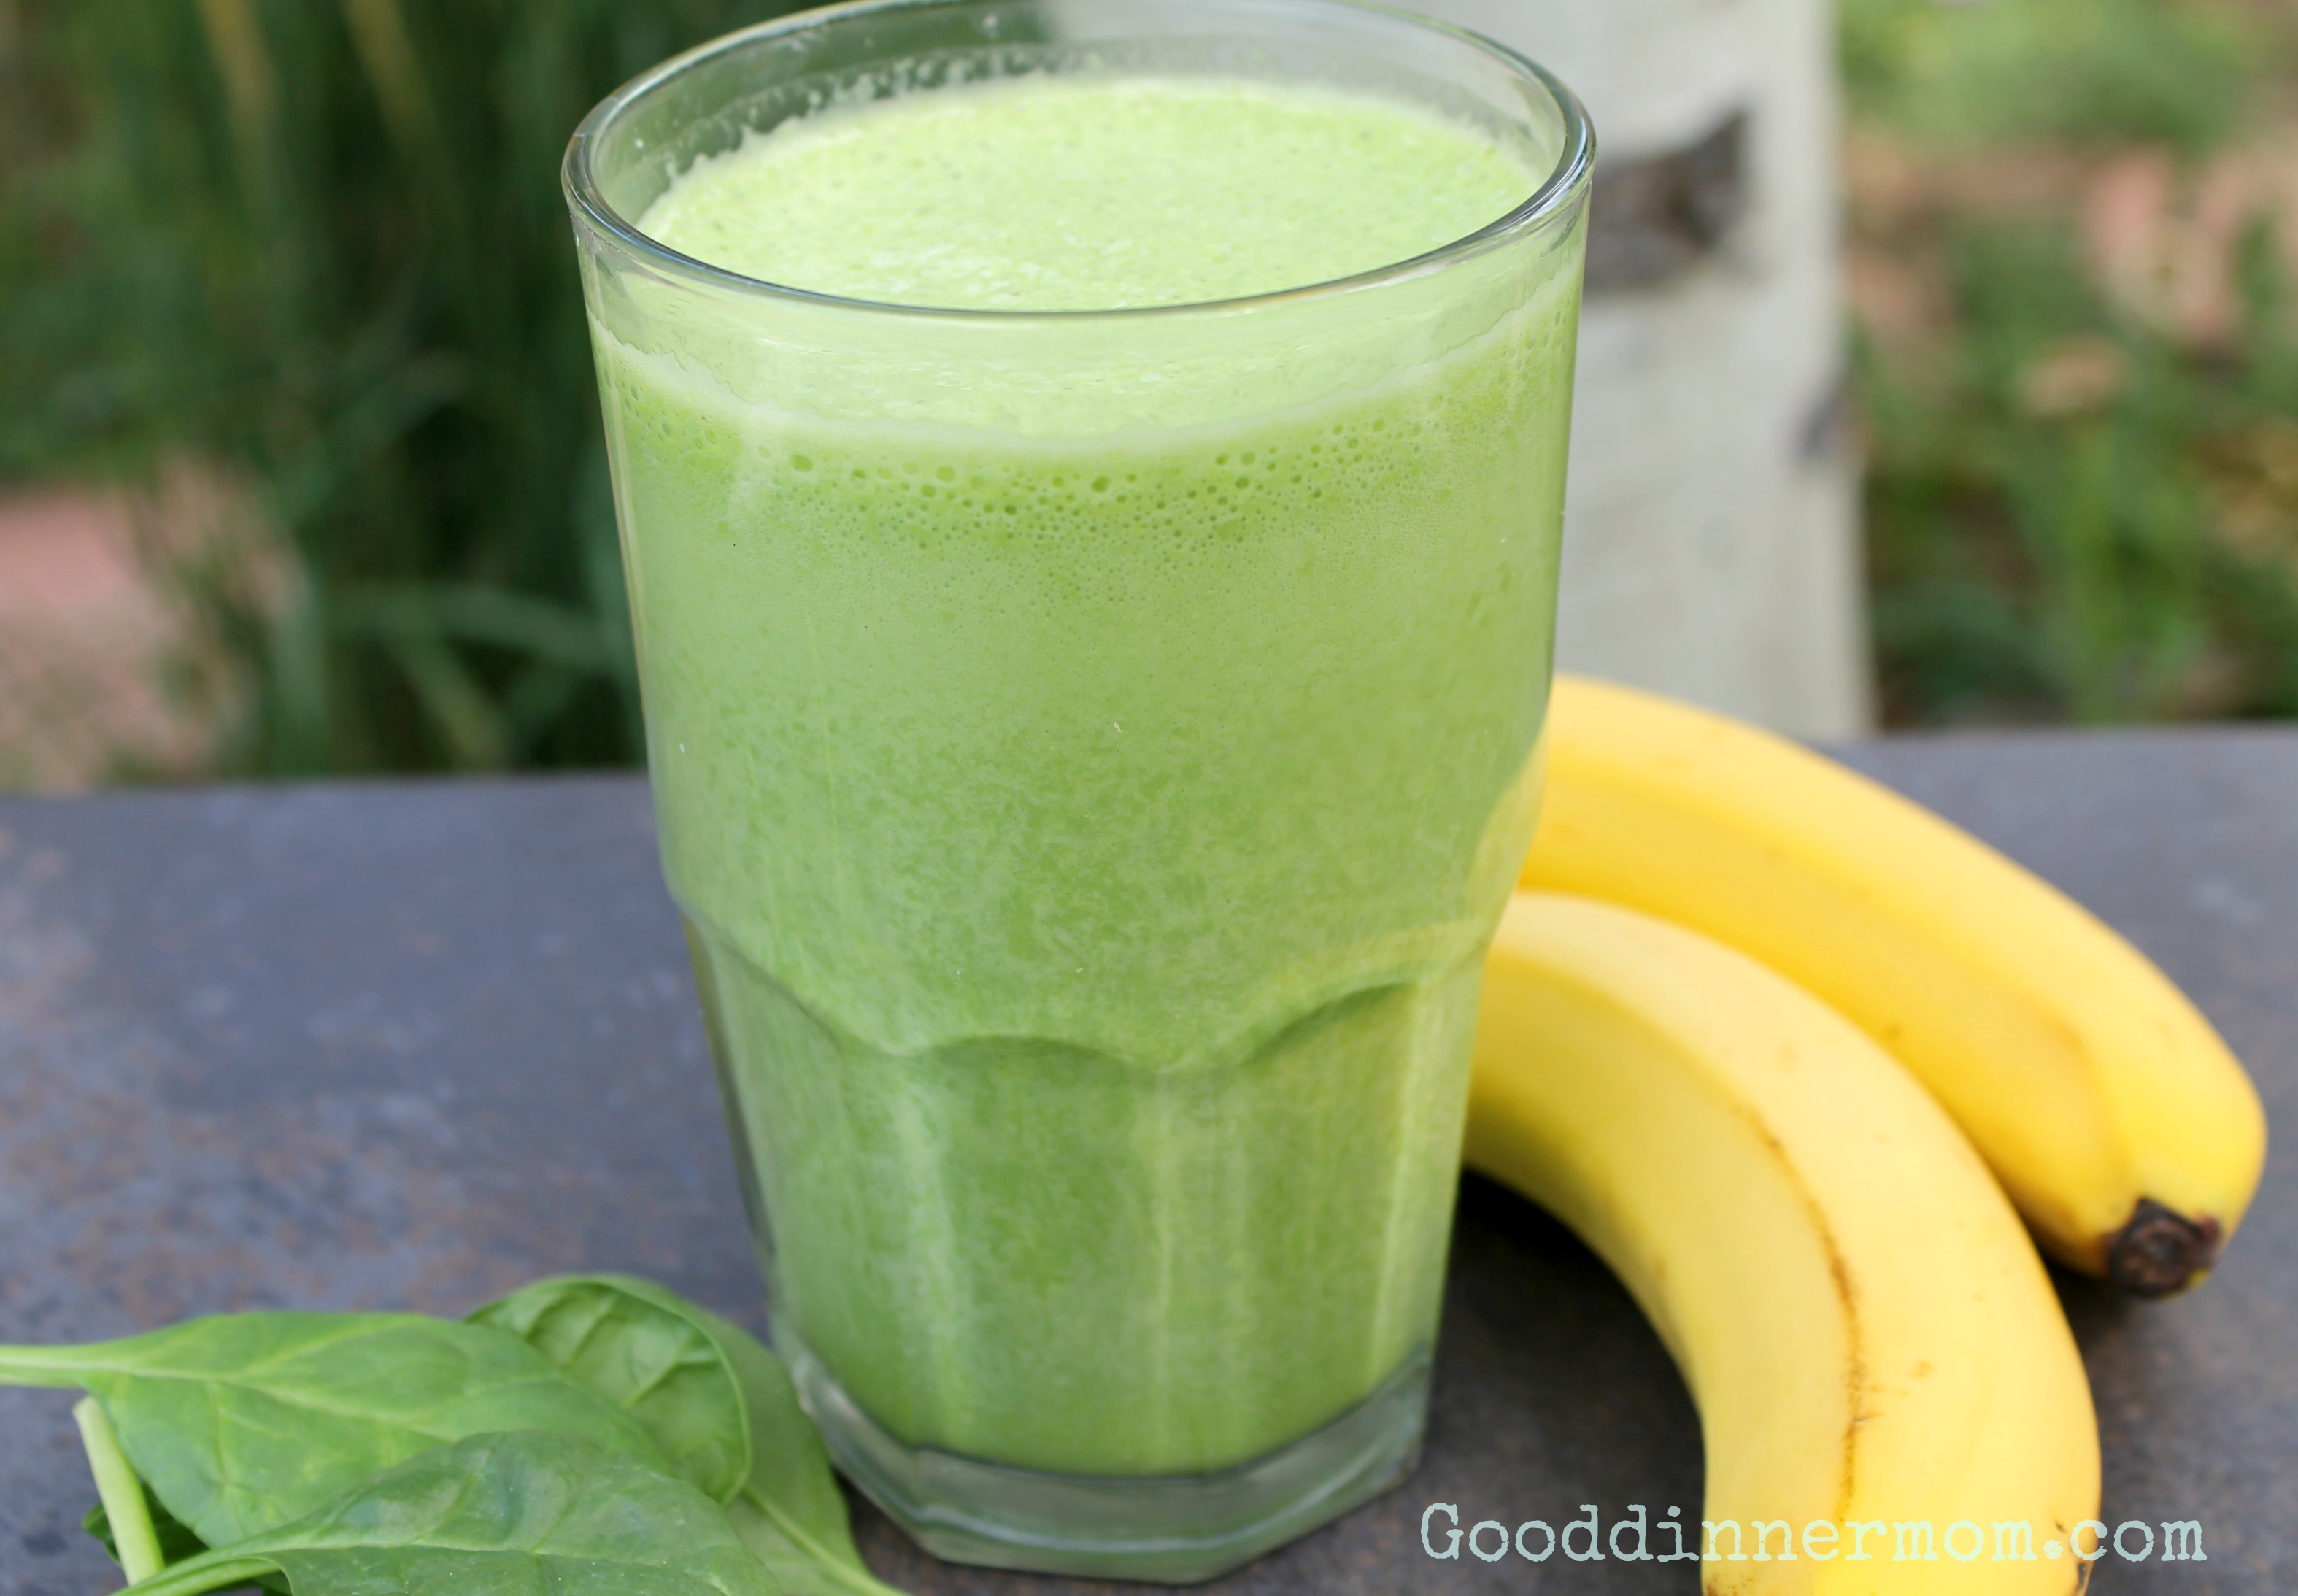 Green Banana Smoothie with simple ingredients. Bananas, spinach, milk and ice make a super nutritious, filling smoothie that kids and adults will love.